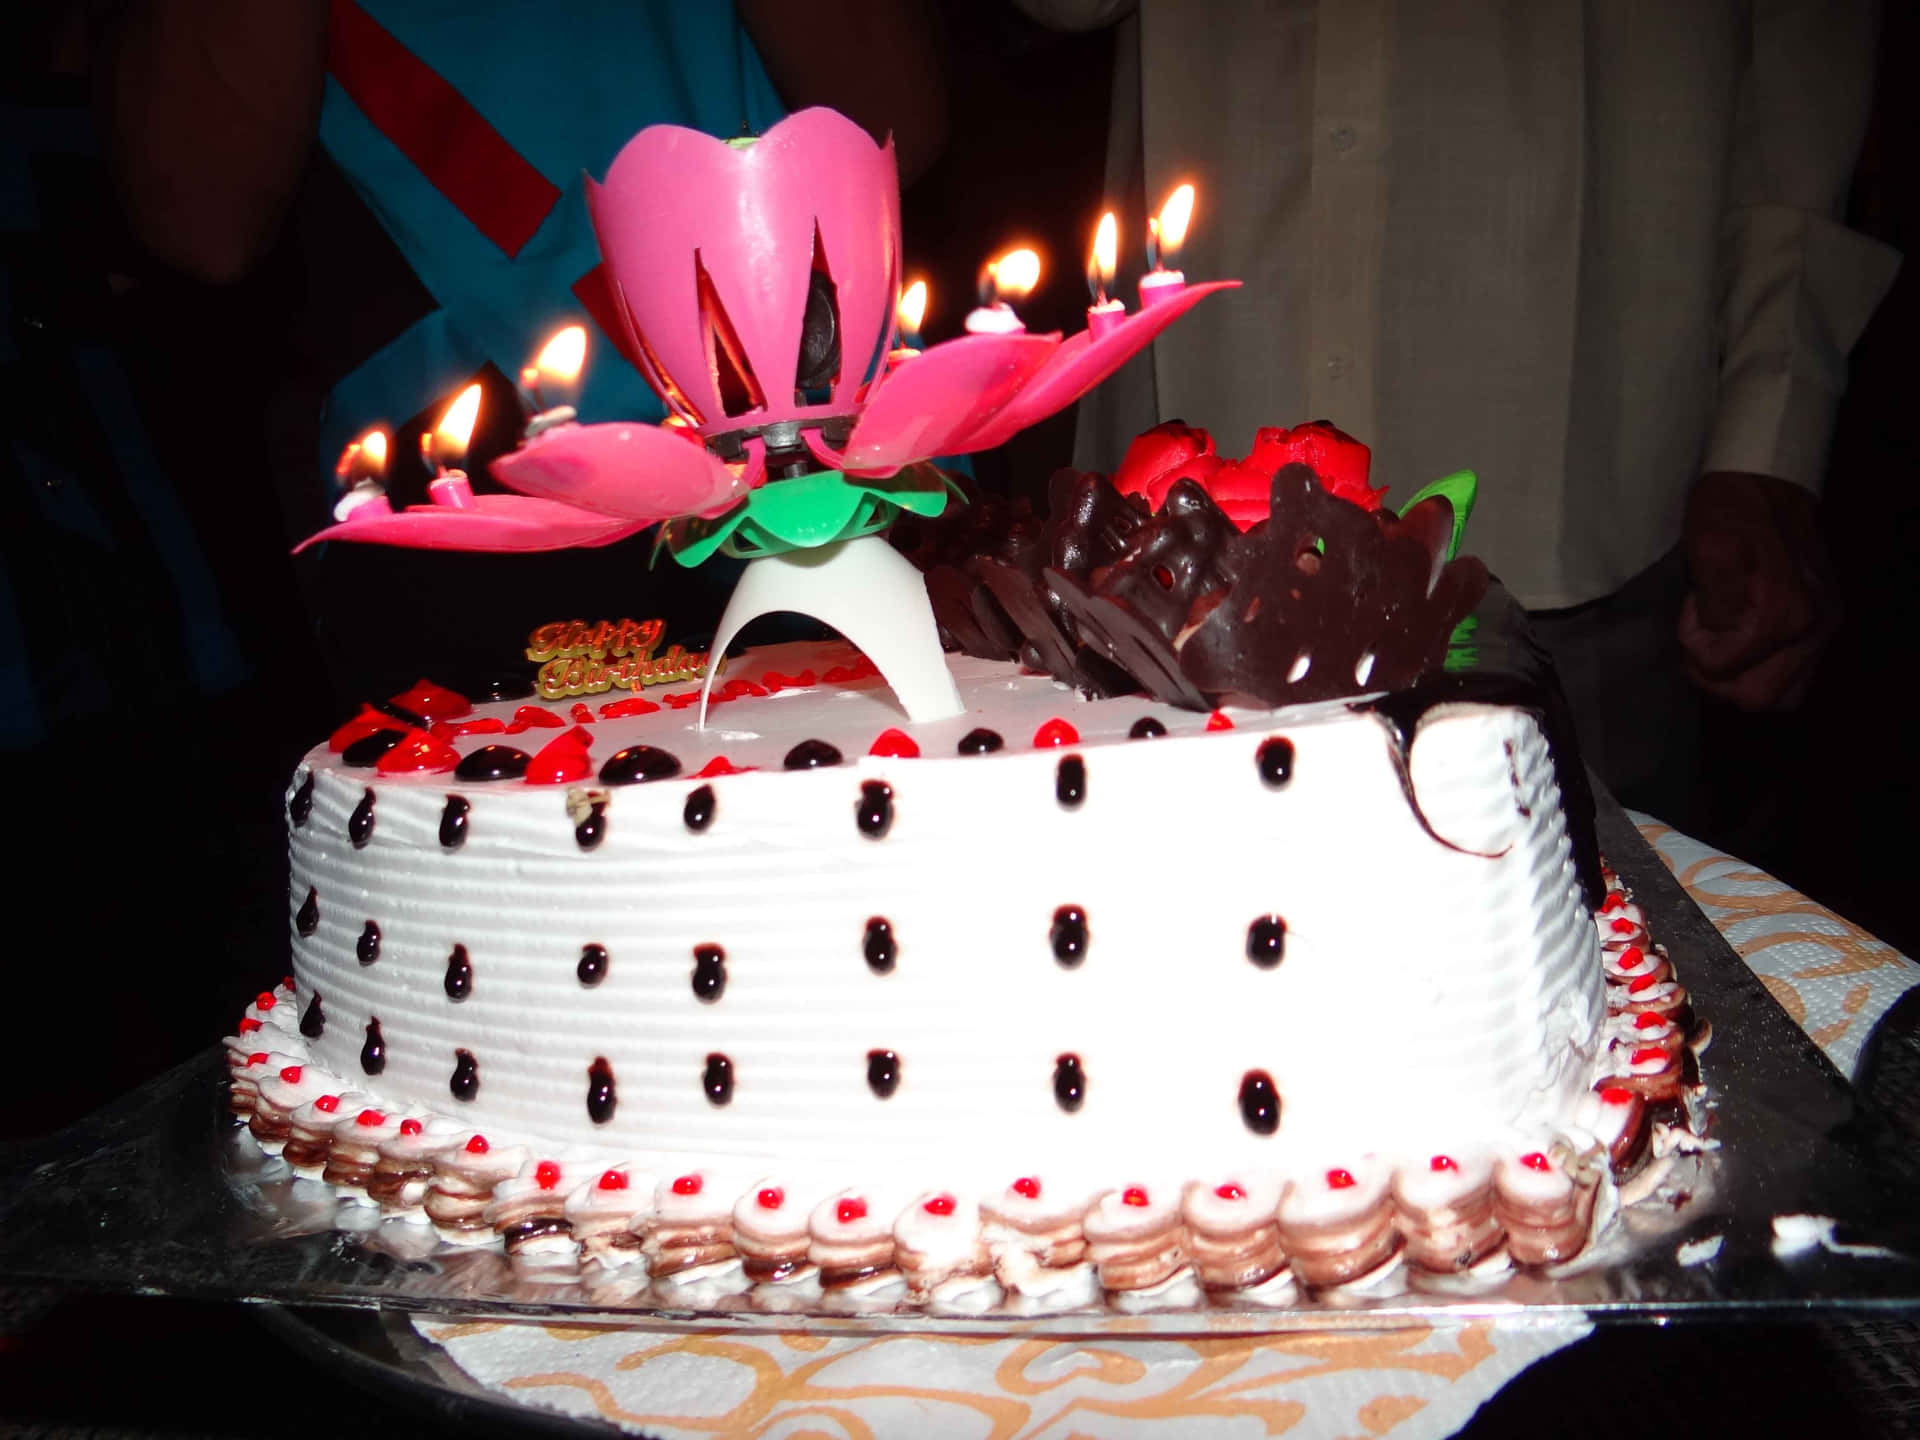 Celebrate special days with delicious birthday cakes!